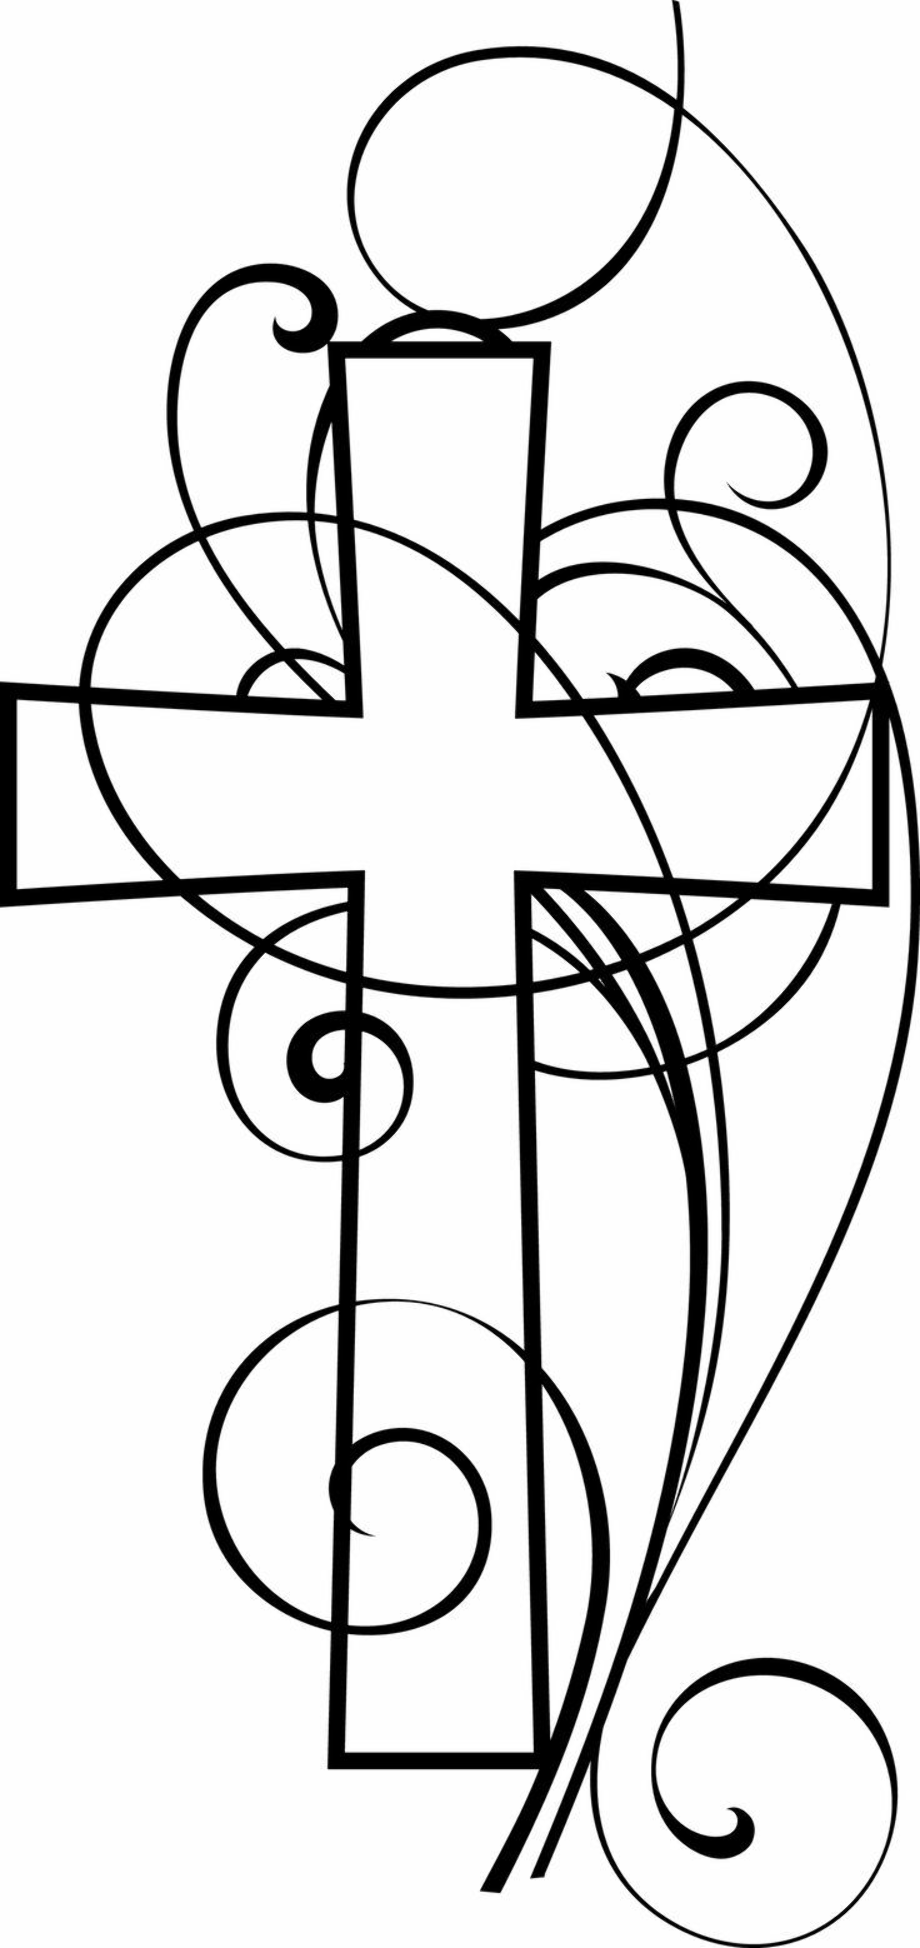 cross clipart black and white cool